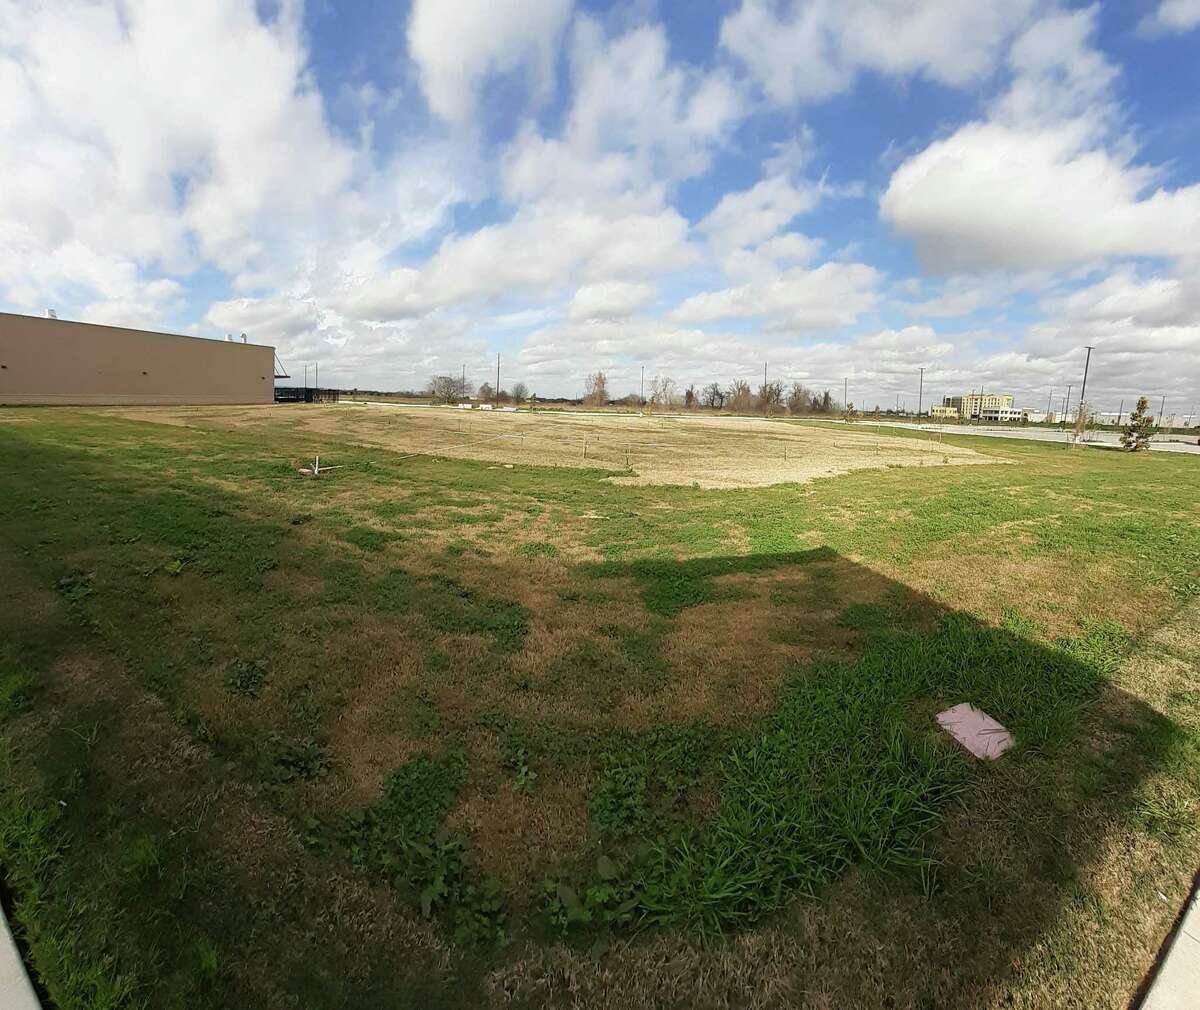 The grave site for 95 African-American remains. The human remains were discovered in 2018 at the construction site of the James Reese Career and Technical Center. The human remains are believed to be part of the convict-leasing system, where prisoners were contracted out to perform cheap labor across the state.